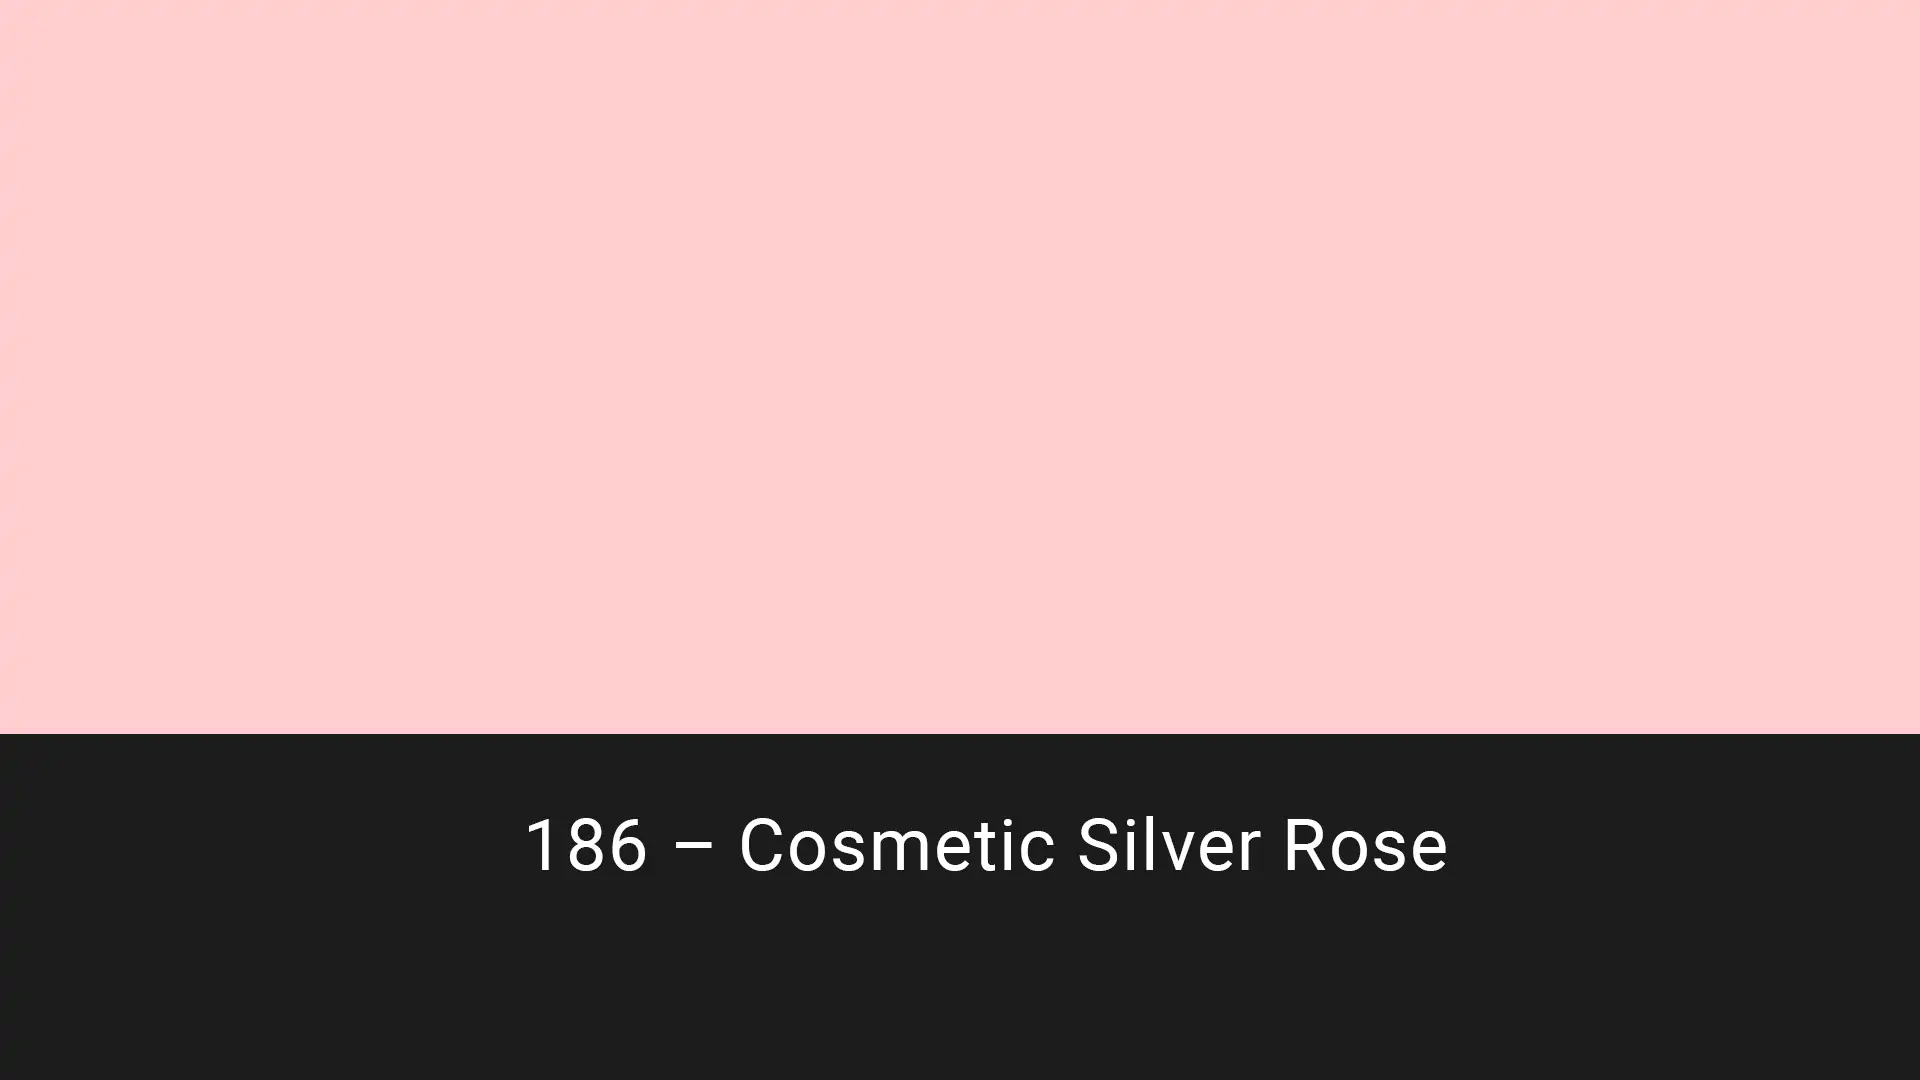 Cotech filters 186 Cosmetic Silver Rose